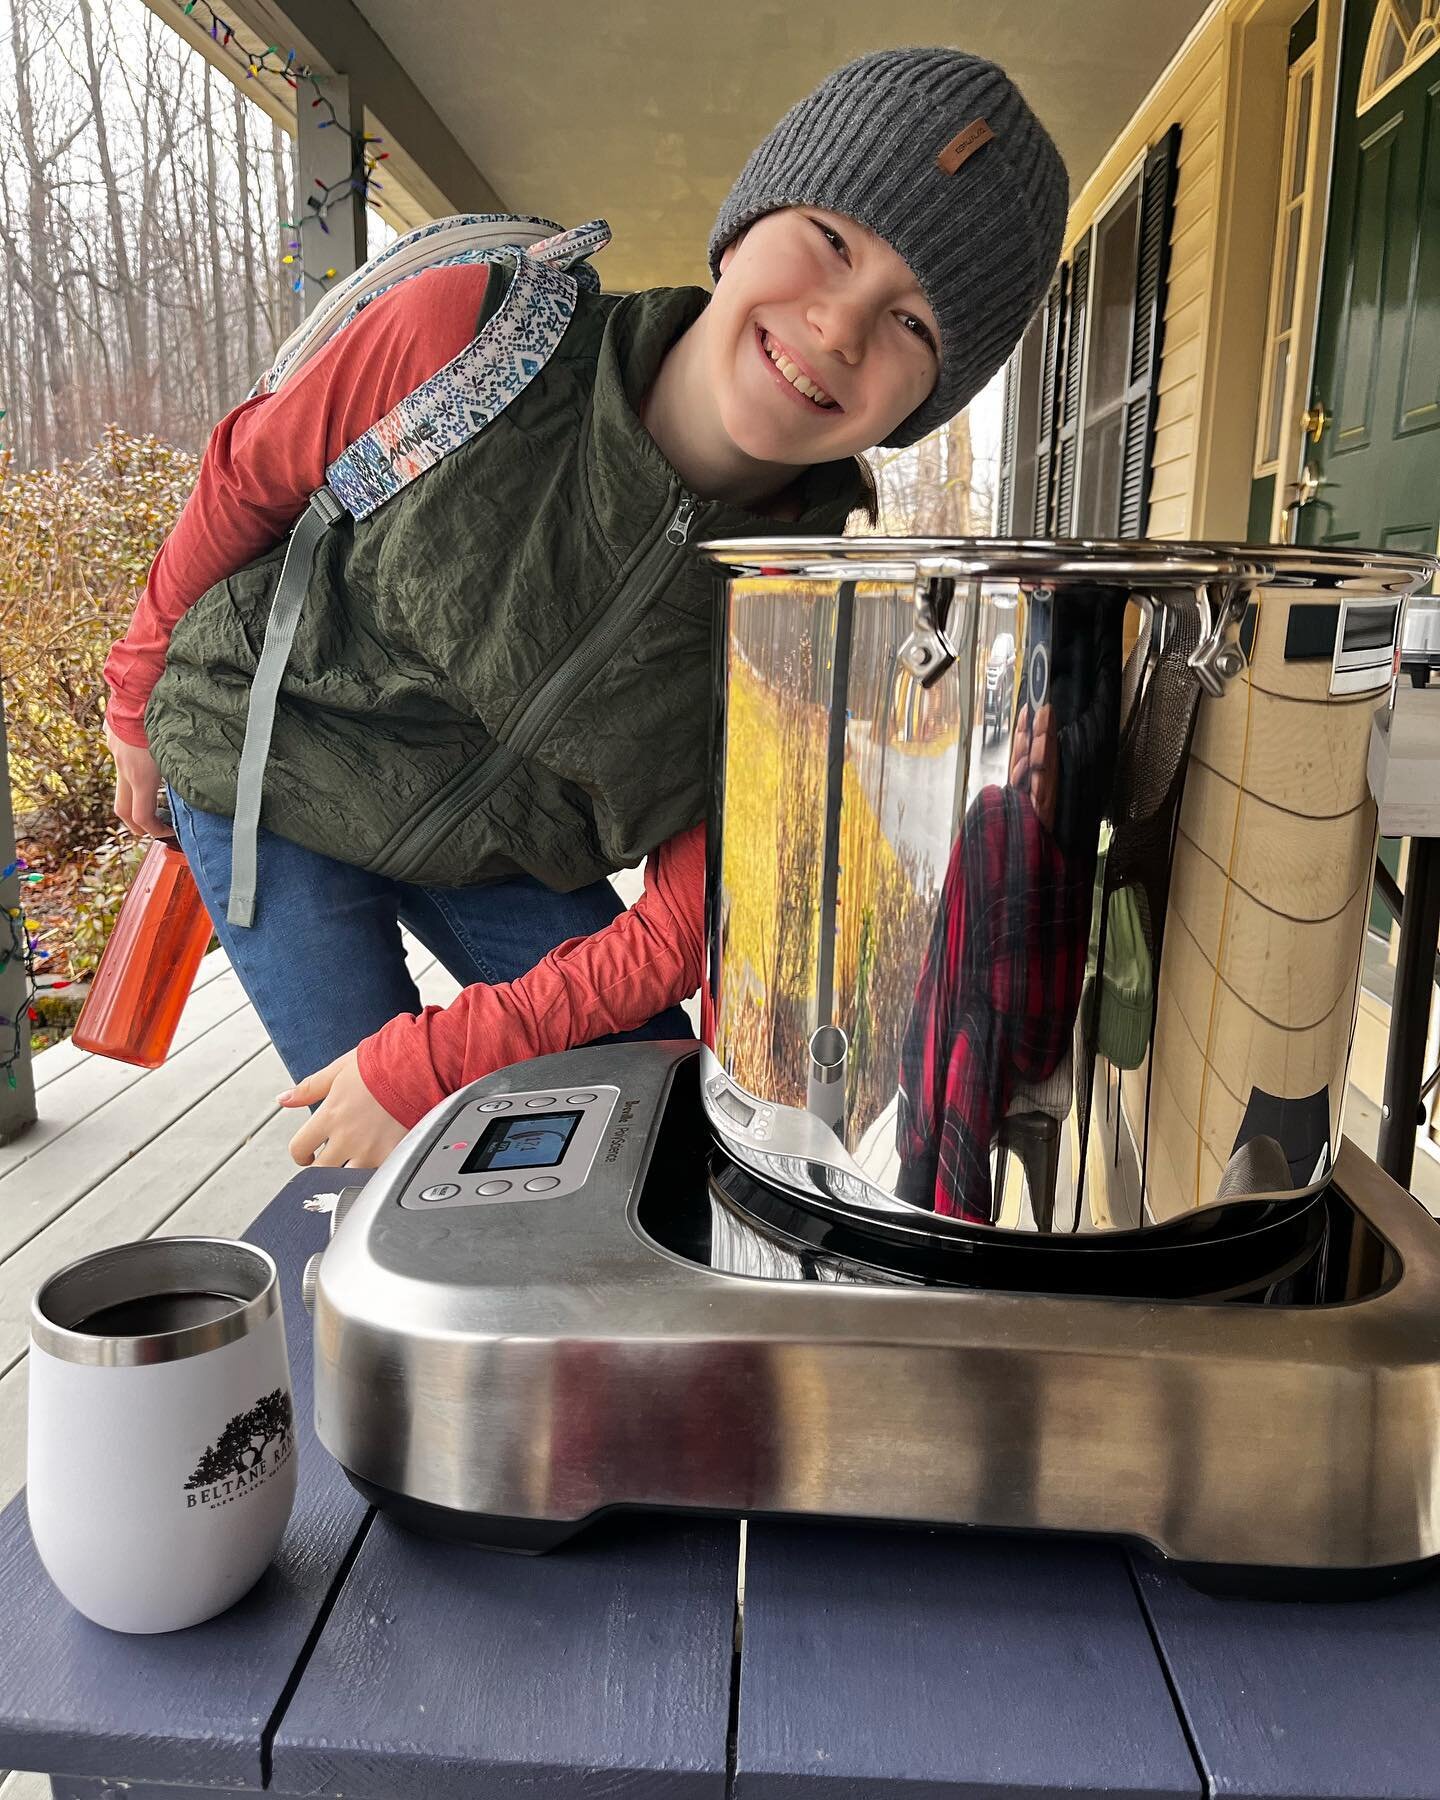 And so it begins 🍁🧡

#sugaring #mapletrees #maplesyrup
 
My mini set up @breville #polyscience #induction #singleburner @allclad #stockpot #blackcoffee @beltaneranch